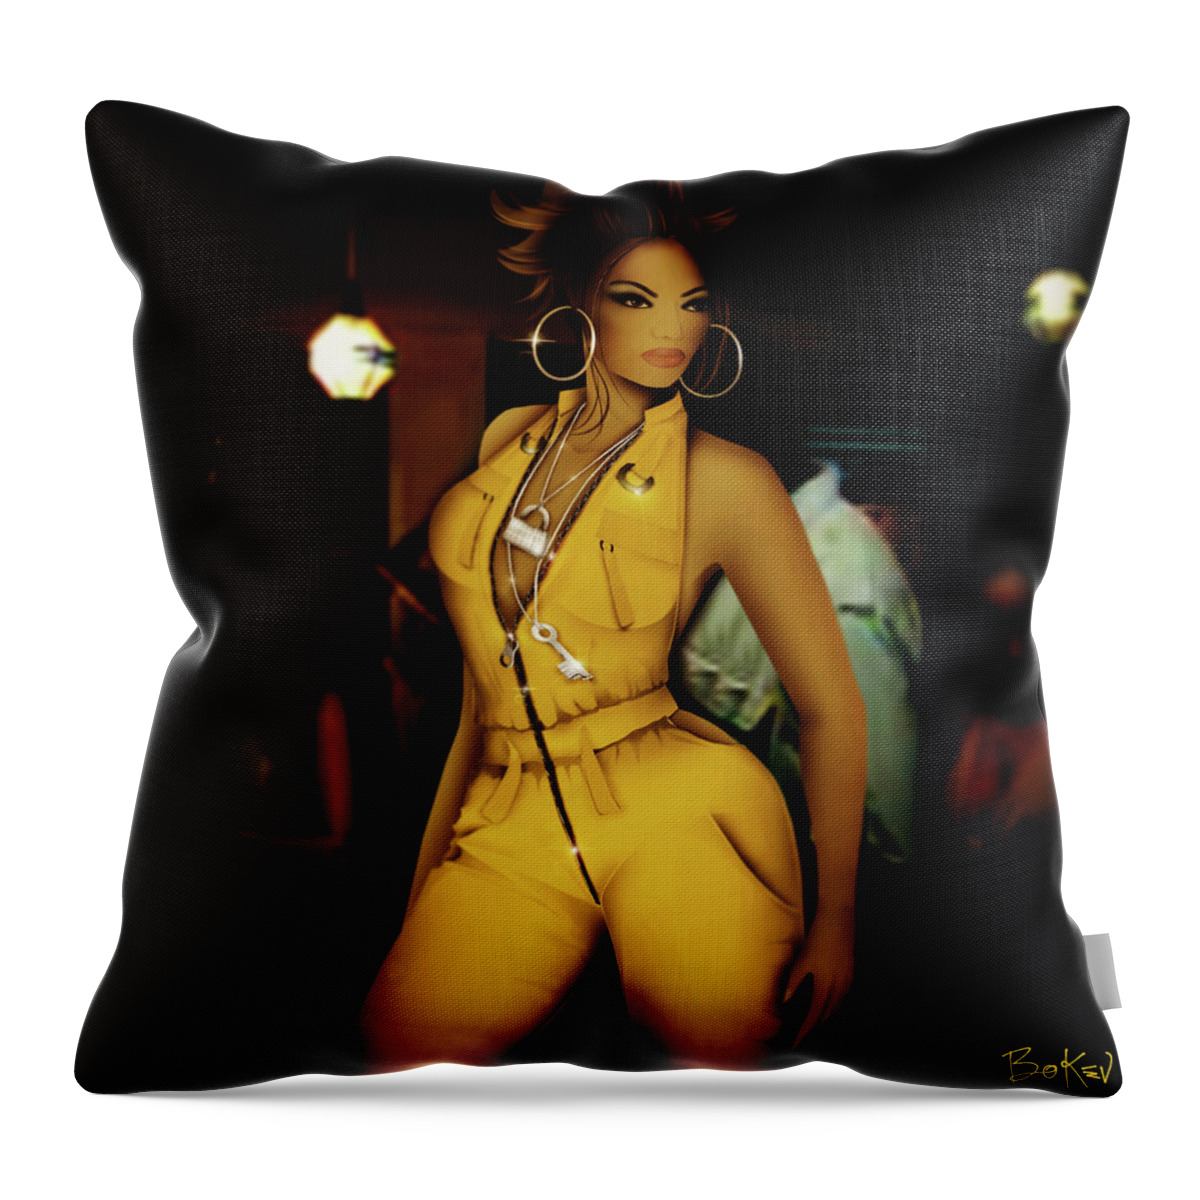 Beyonce Throw Pillow featuring the digital art Beyonce - Baby Boy 3 by Bo Kev